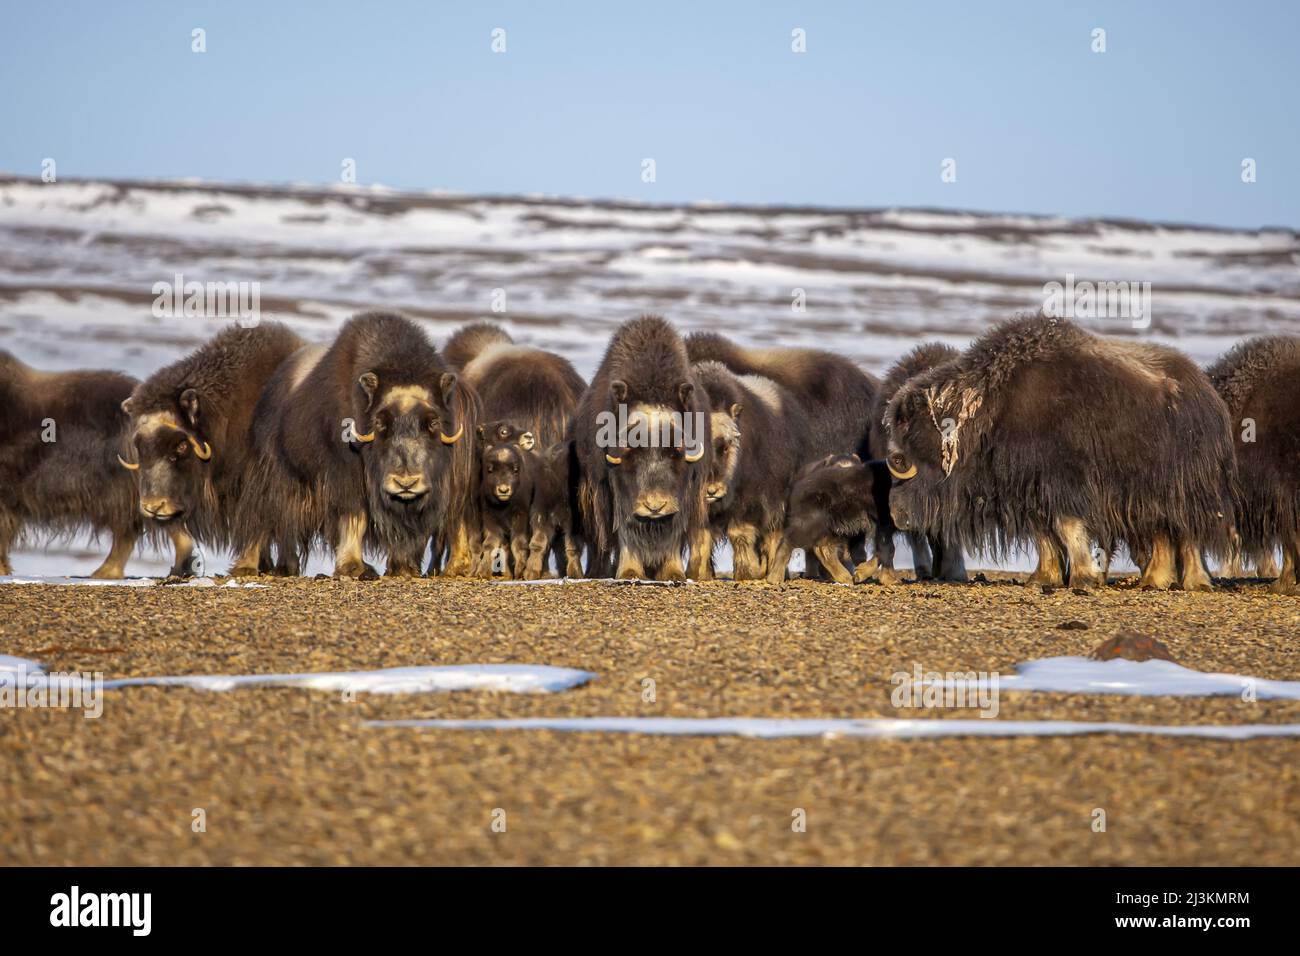 Muskoxen protect their young by forming a circle. Stock Photo